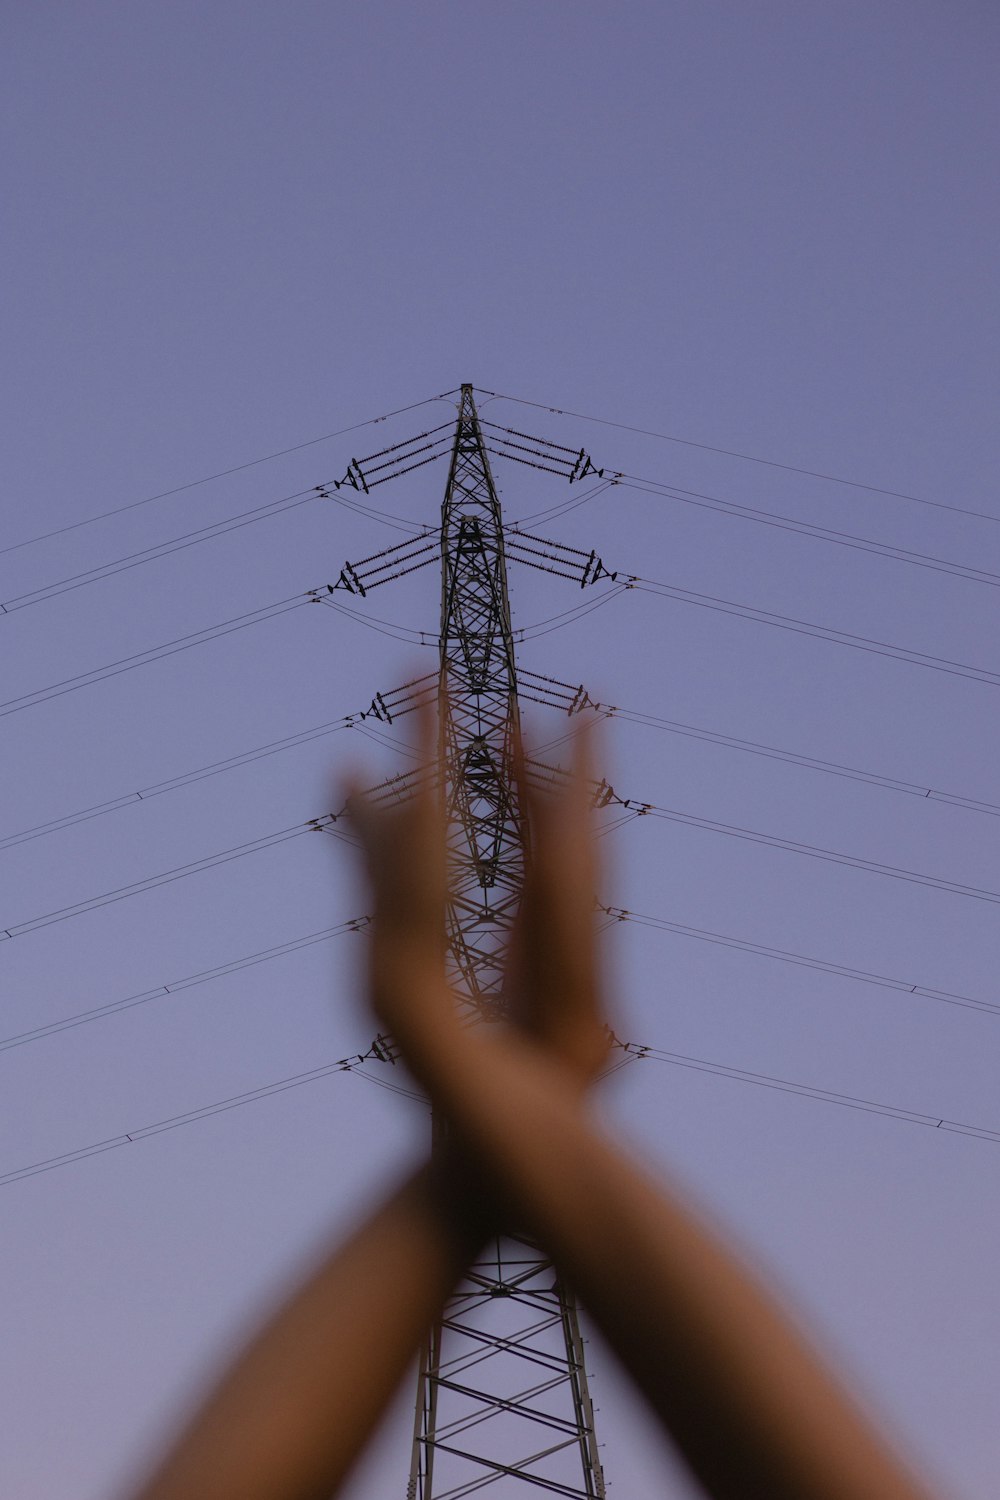 a person holding their hands up in front of a high voltage tower